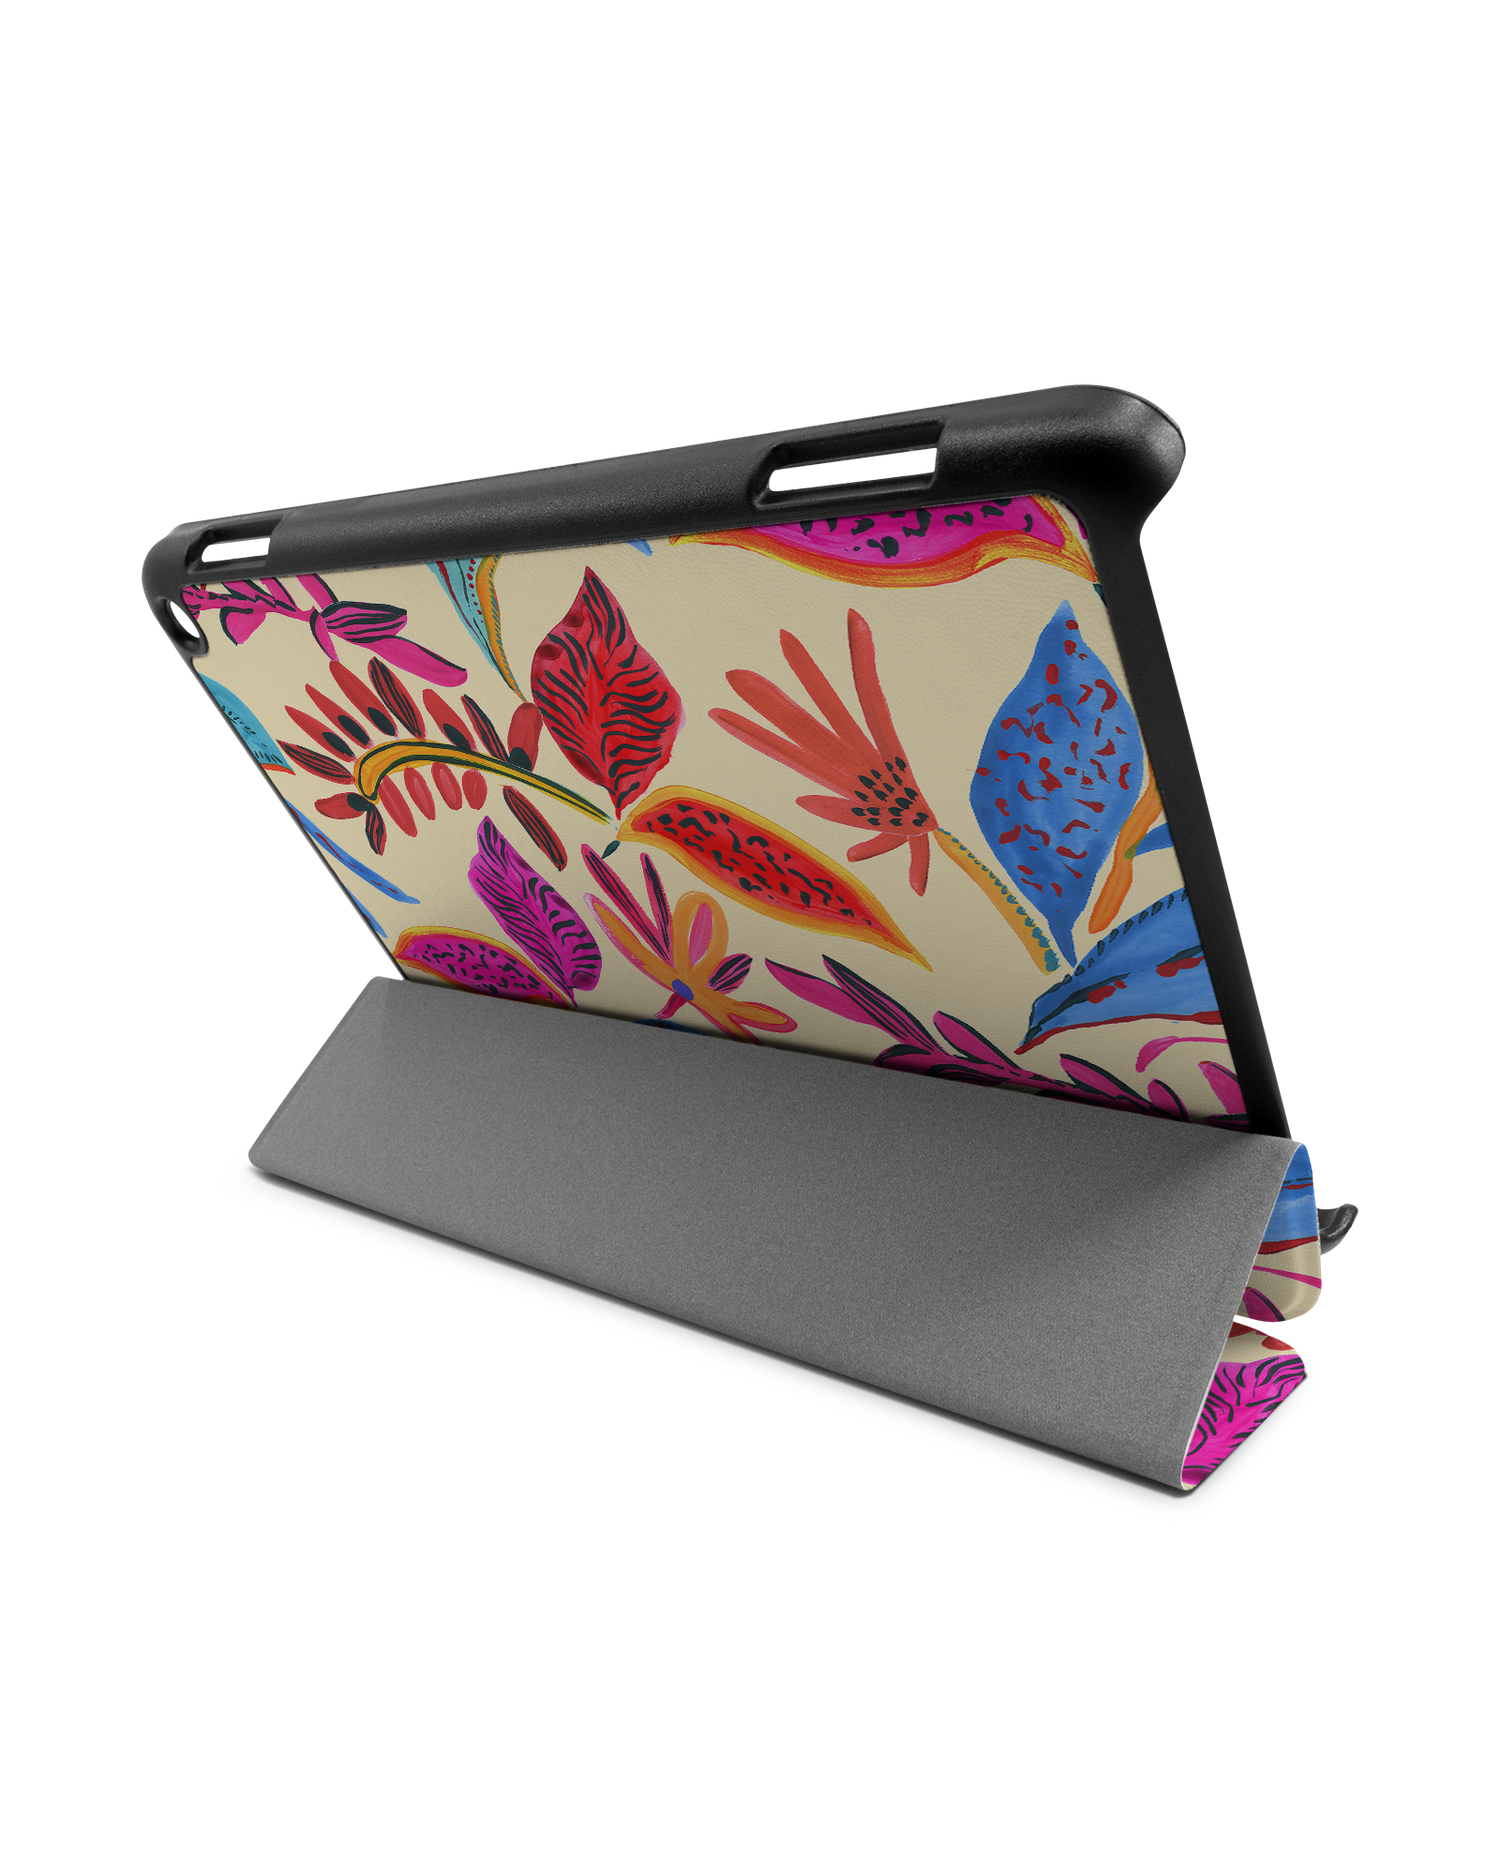 Painterly Spring Leaves Tablet Smart Case for Amazon Fire HD 8 (2022), Amazon Fire HD 8 Plus (2022), Amazon Fire HD 8 (2020), Amazon Fire HD 8 Plus (2020): Used as Stand